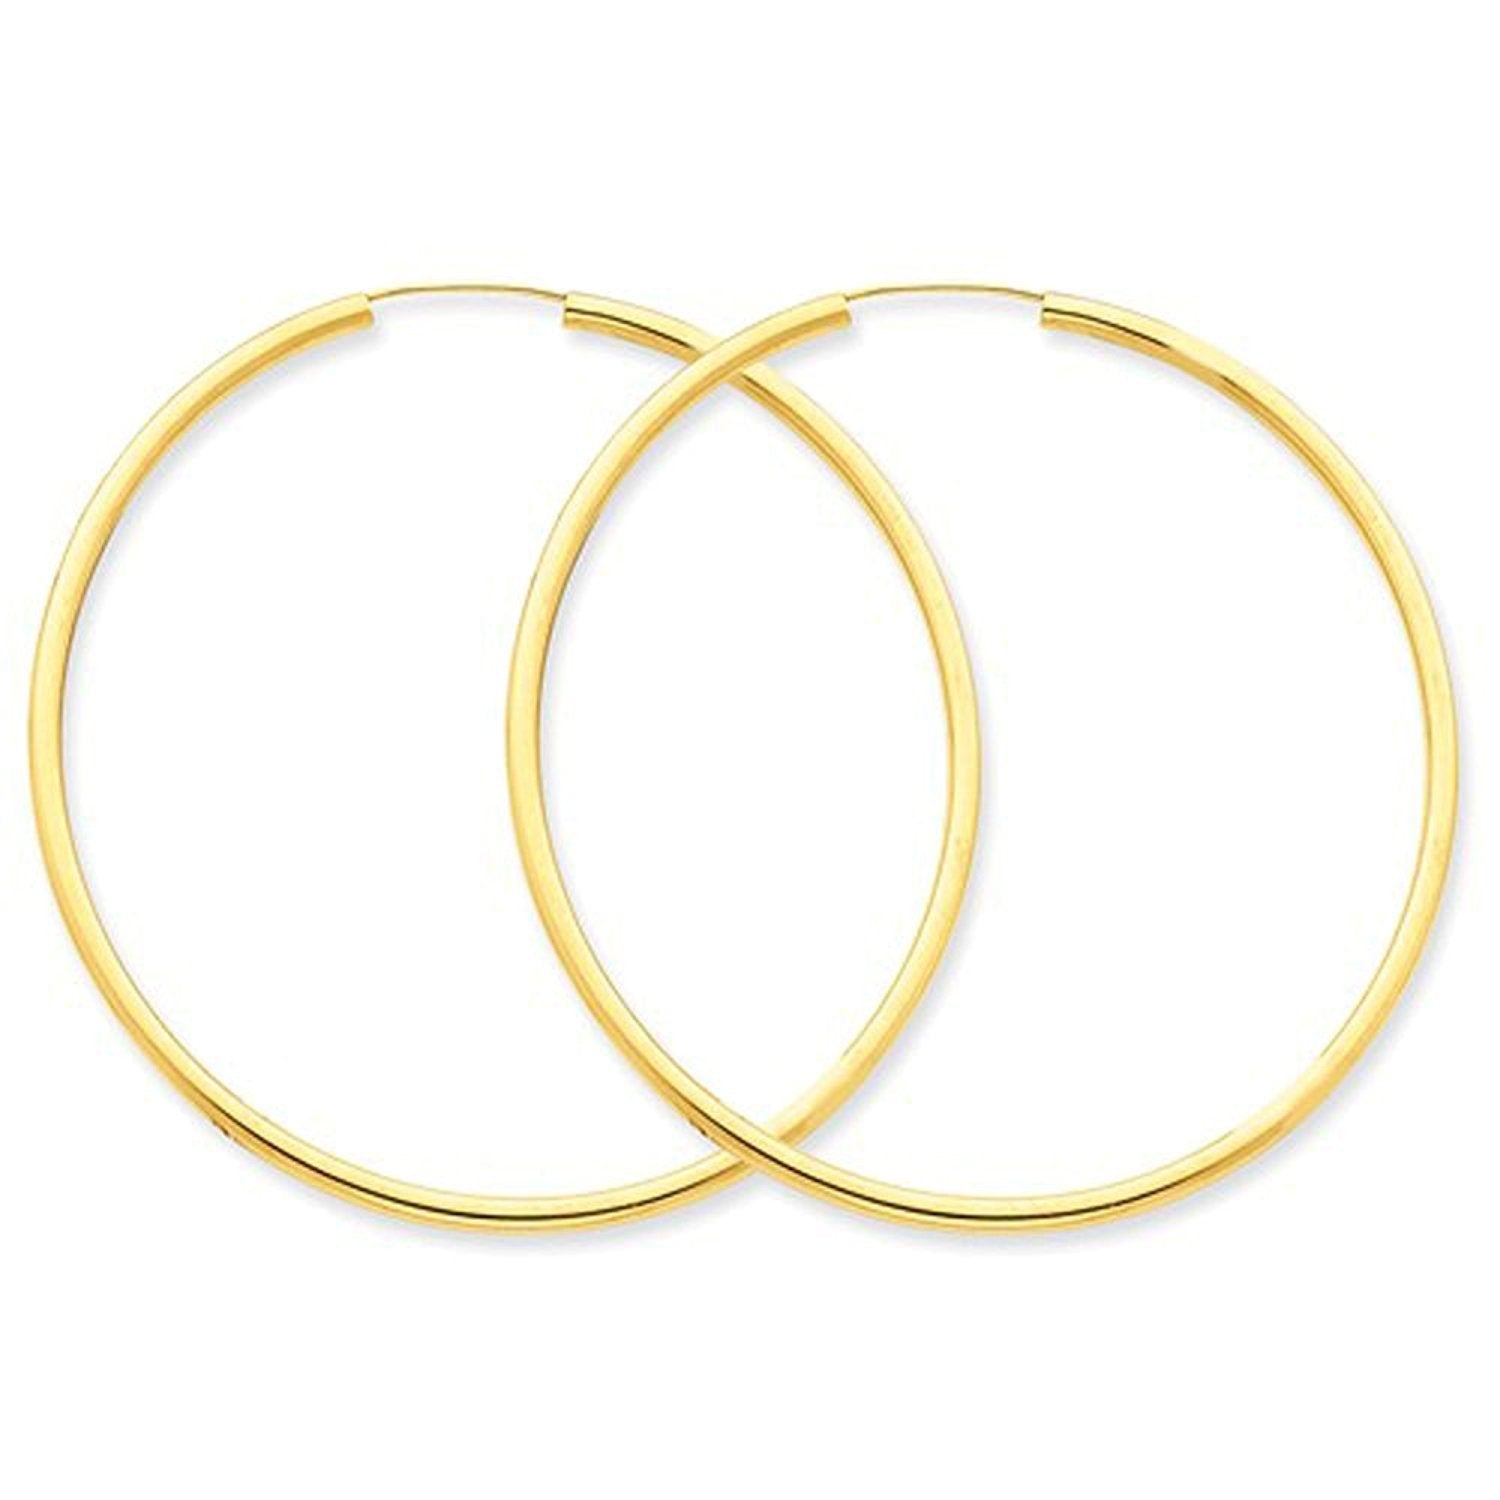 14K Yellow Gold 50mm x 2mm Round Endless Hoop Earrings